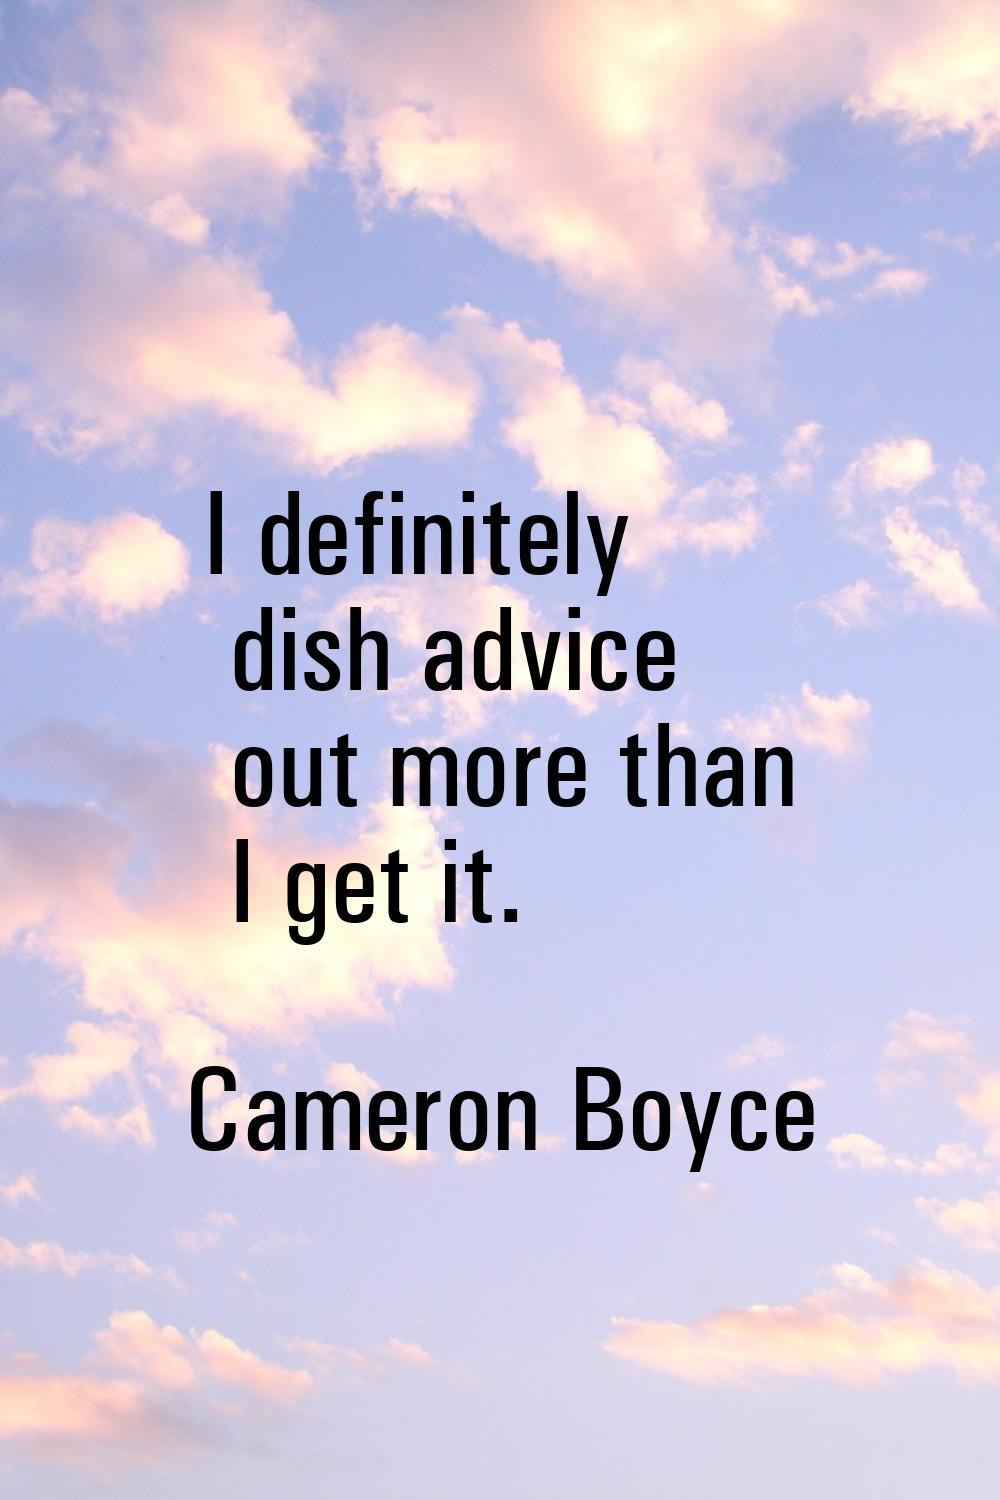 I definitely dish advice out more than I get it.